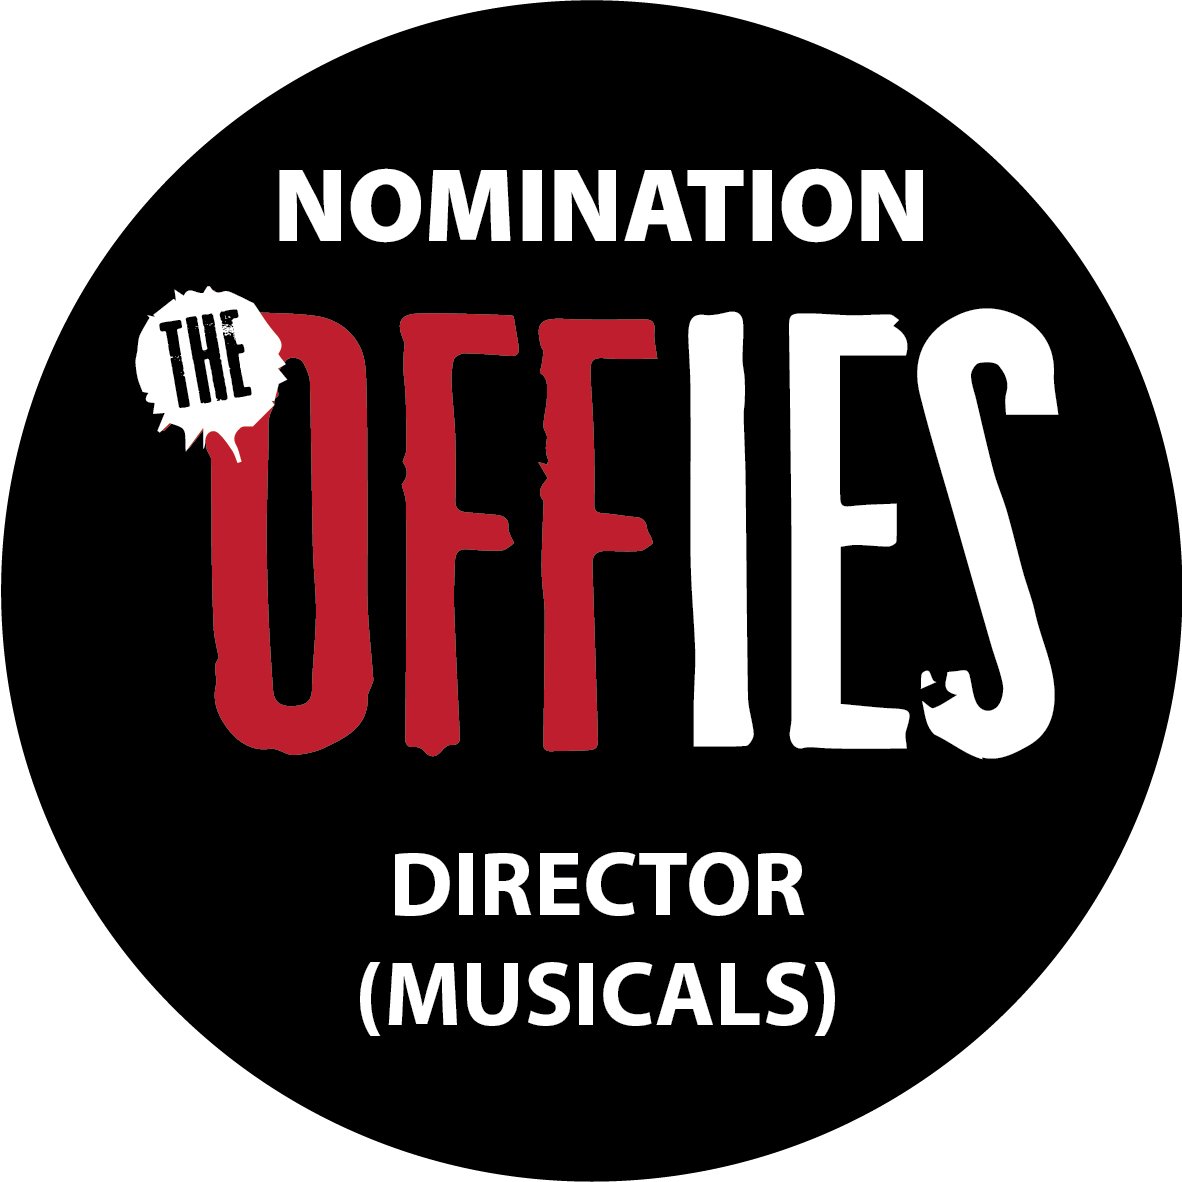 #Offies #NewNoms for “Islander: A New Musical” #IslanderMusical from Helen Milne Productions @_HMProductions at the Southwark Playhouse @swkplay: NEW MUSICAL; DIRECTOR (MUSICALS) Amy Draper @amyrosedraper - congratulations!